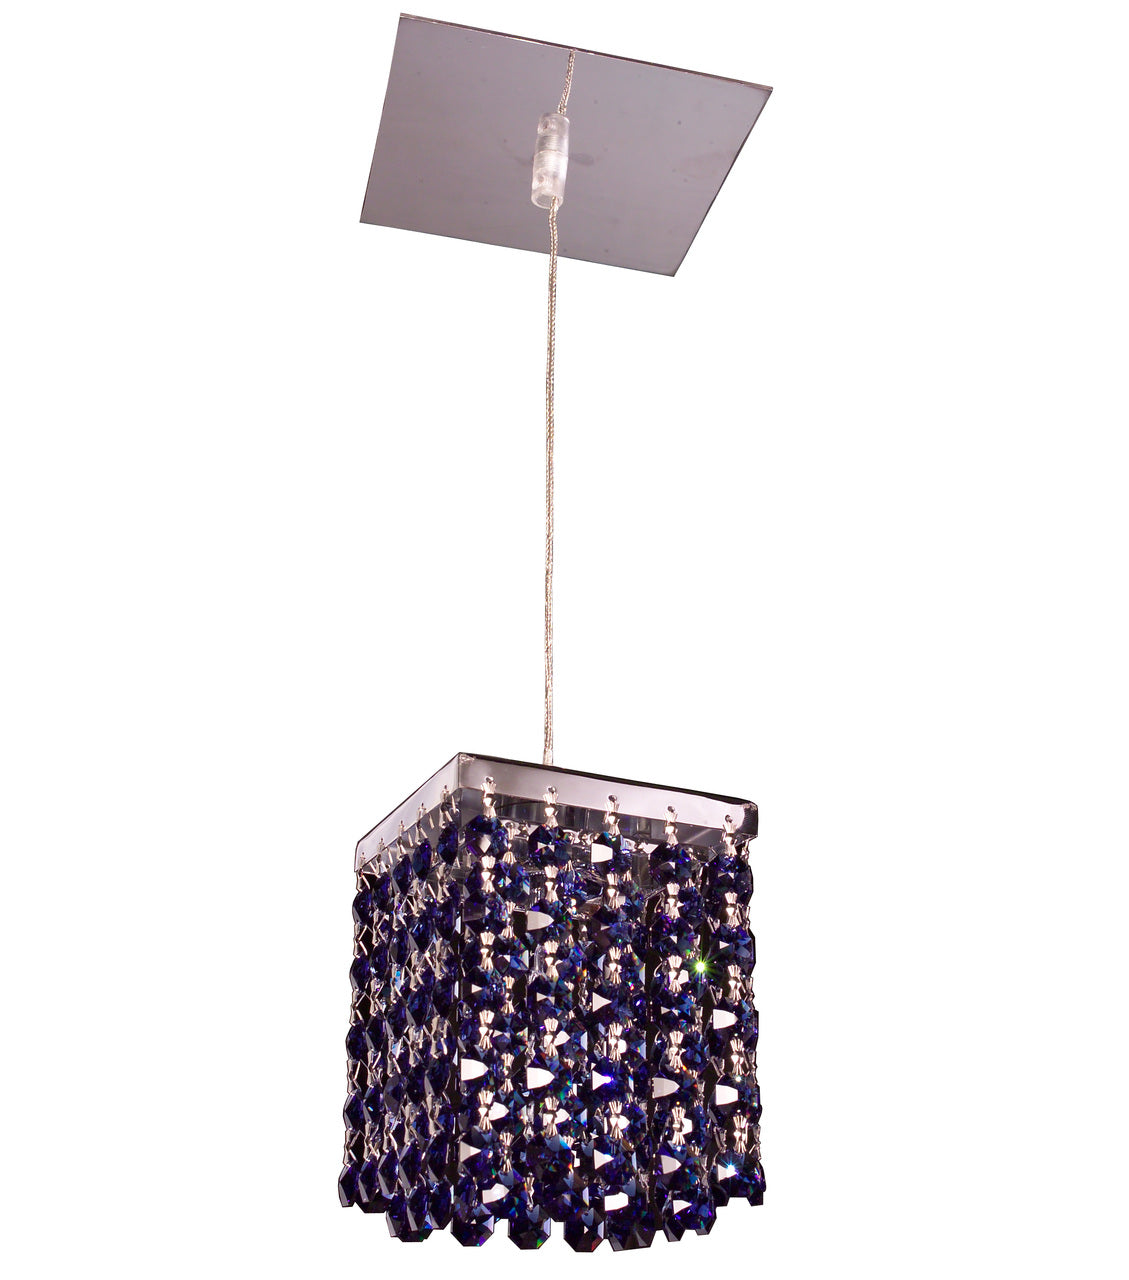 Classic Lighting 16101 SDS Bedazzle Crystal Pendant in Chrome